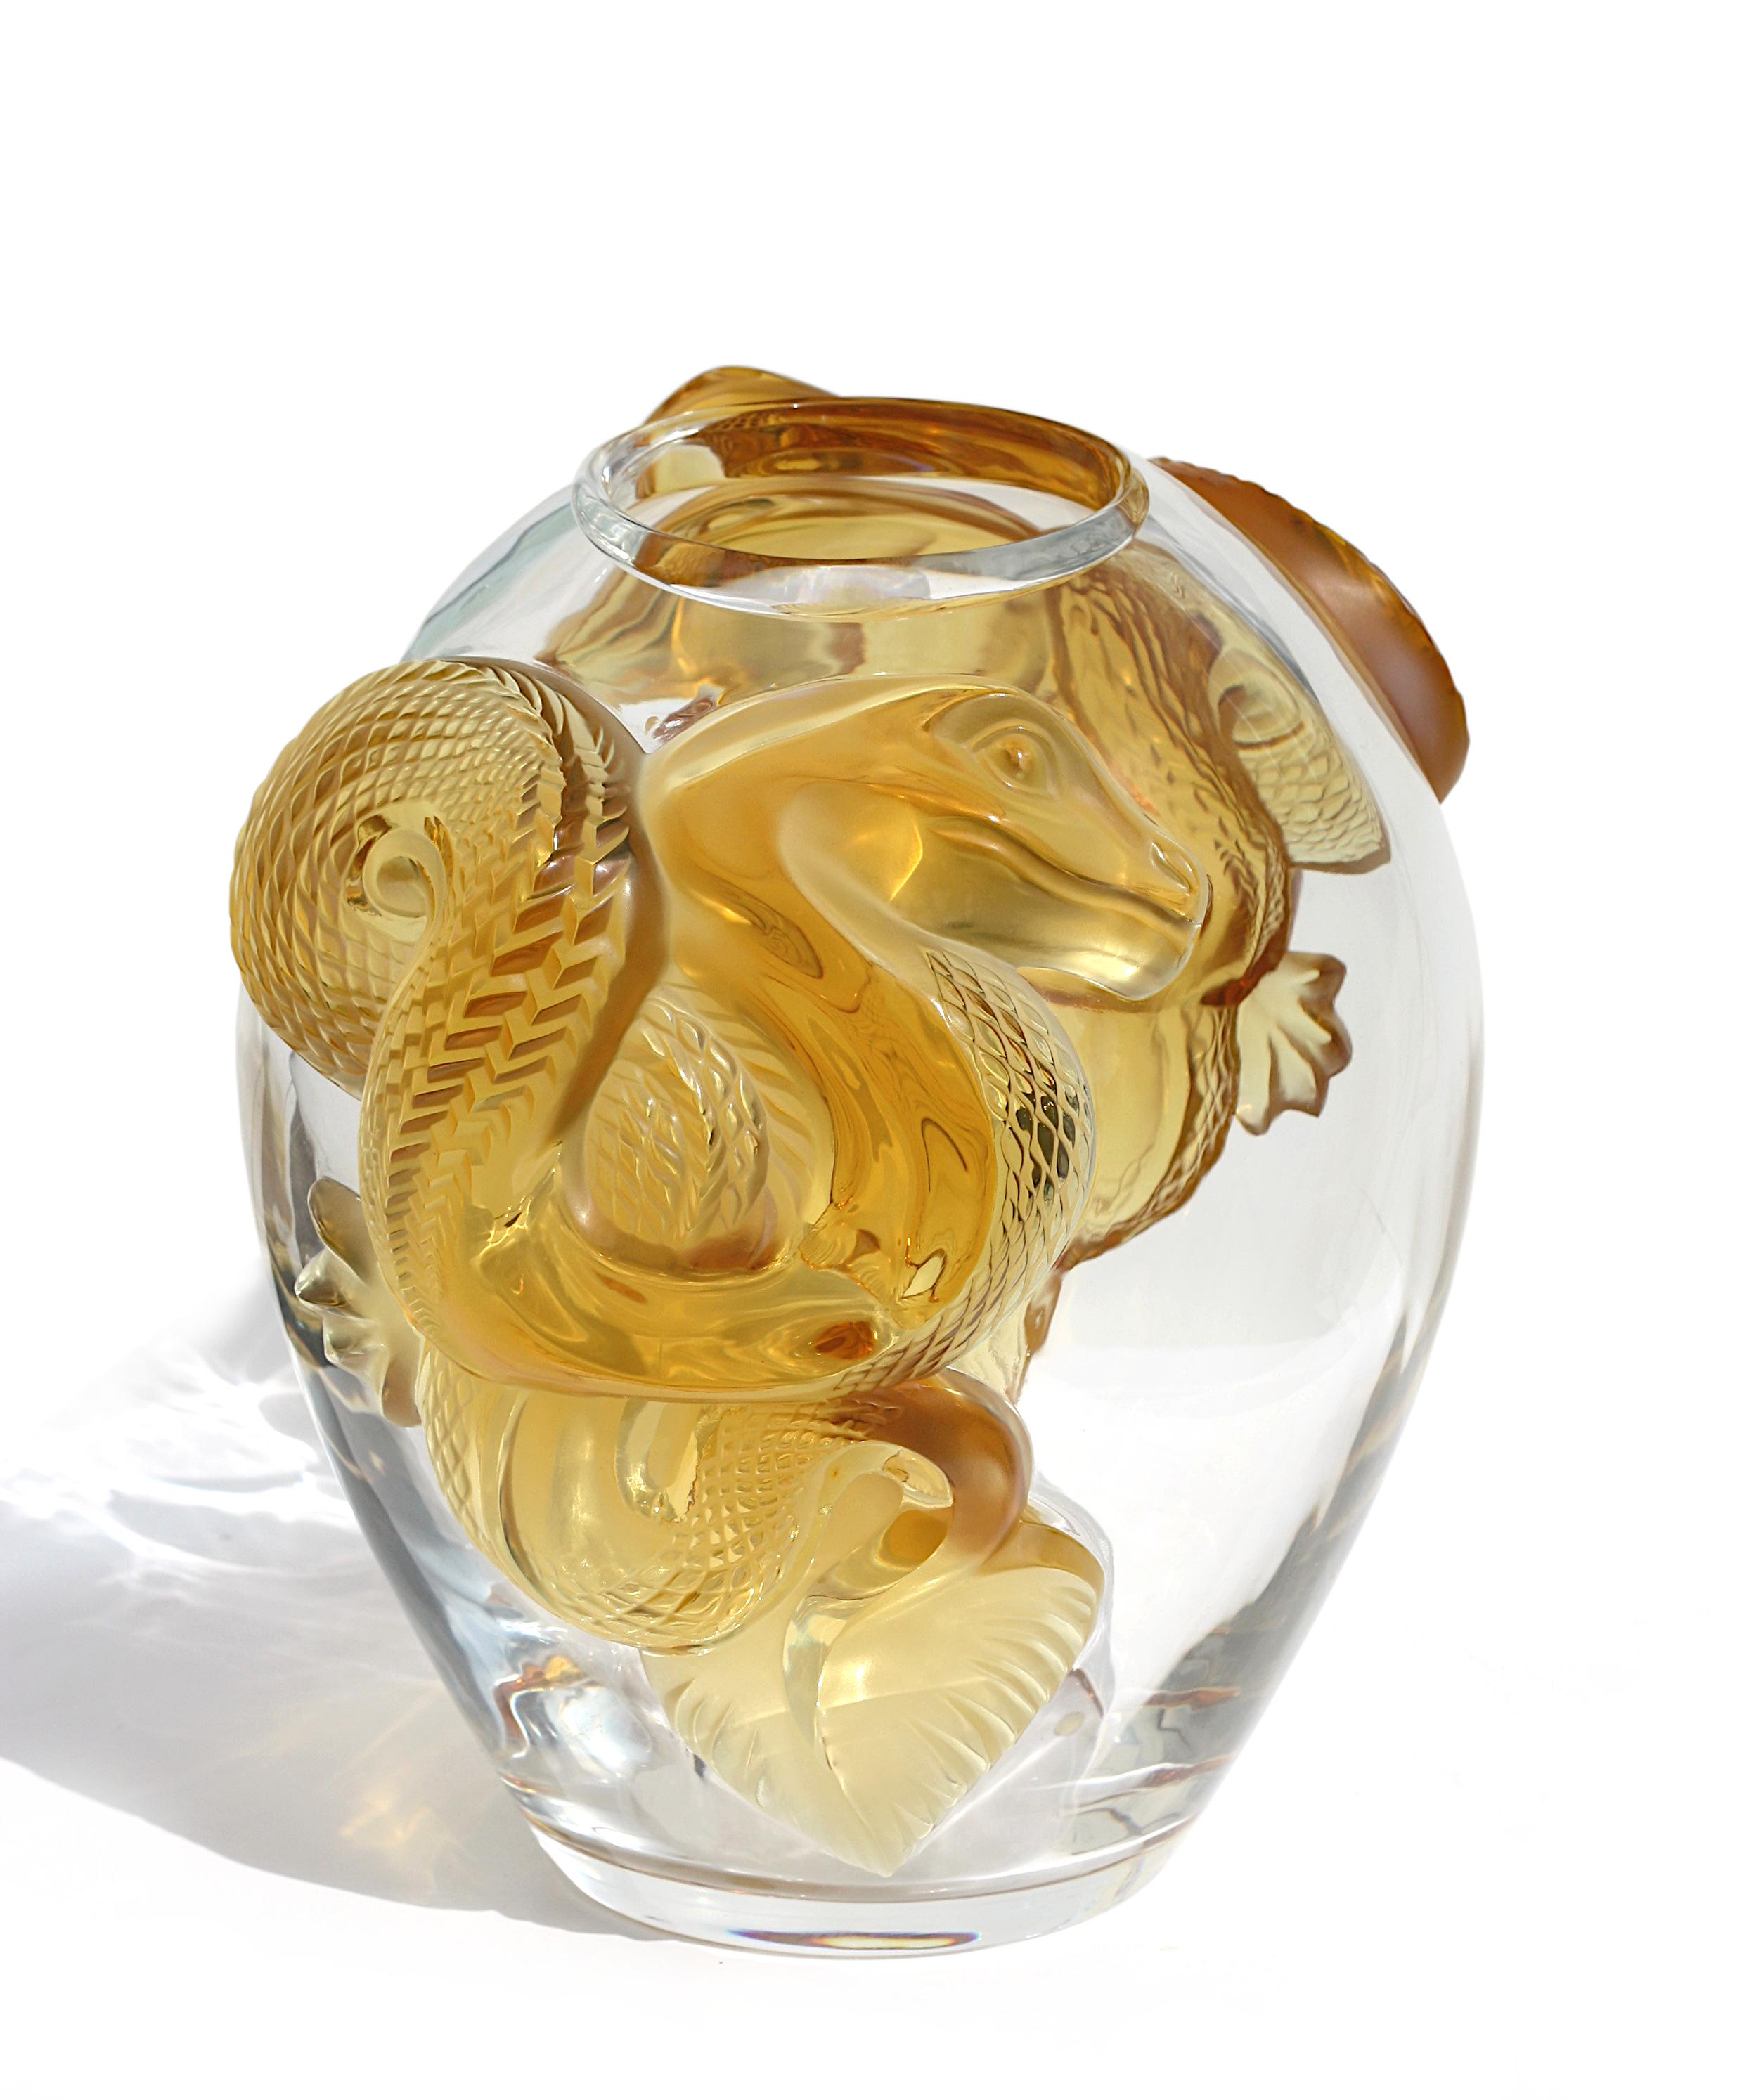 A large Lalique Crystal Serpent pattern vase,
Modern, serpents are delicately engraved into the imposing flanks of the serpent vase, their scales emphasized by the brilliance of crystal,
engraved 'Lalique France' and numbered 69/99
approximately